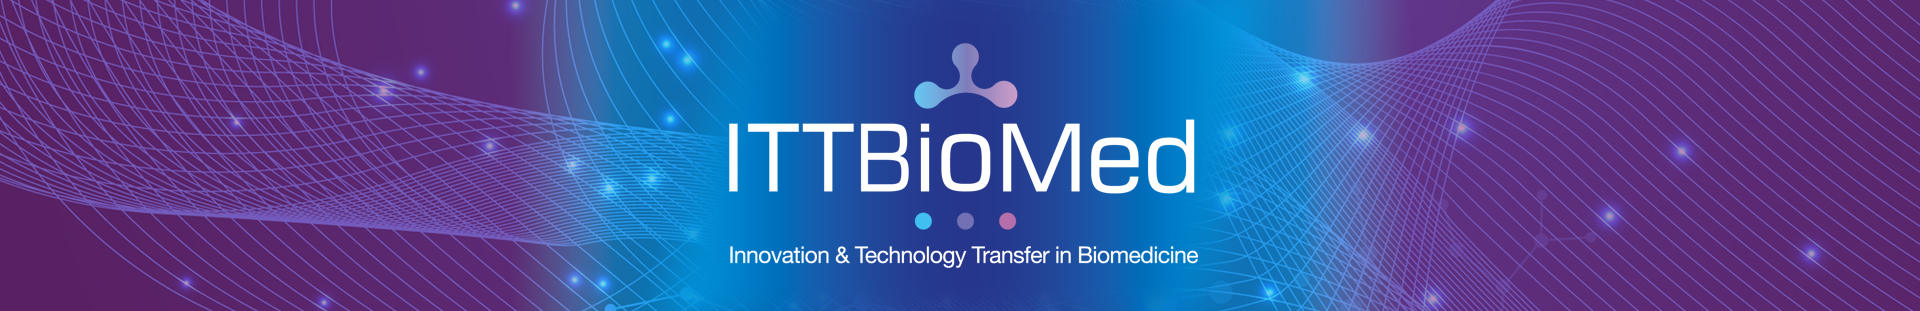 ITTBioMed_Innovation_and_Technology_Transfer_in_Biomedicine